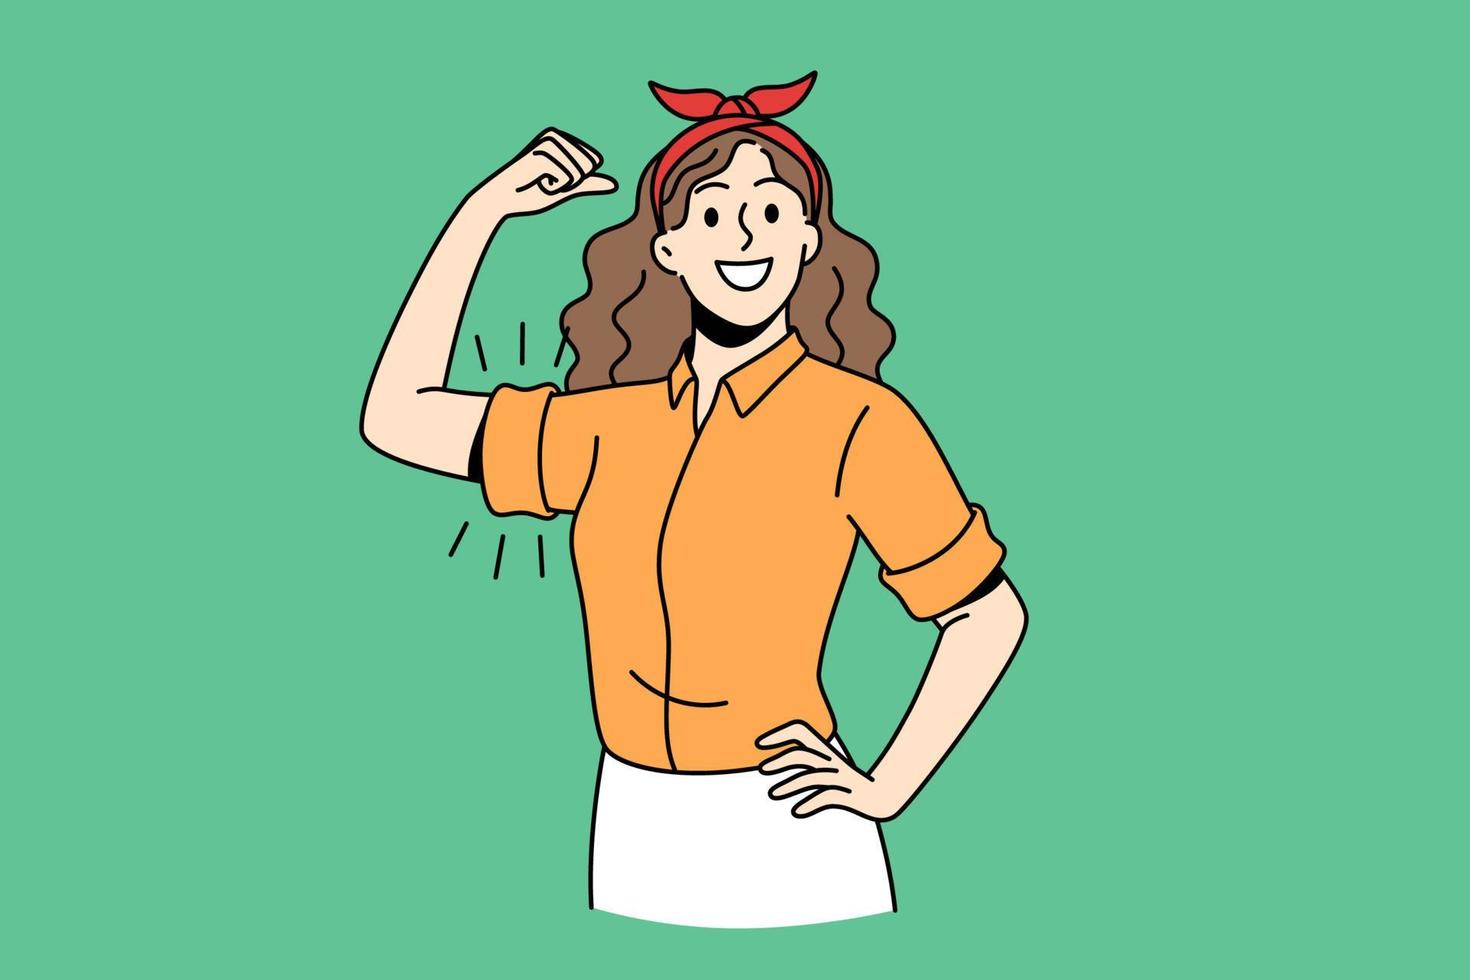 Feminism, self confidence of woman concept. Young smiling girl cartoon character standing showing biceps feeling confident strong vector illustration